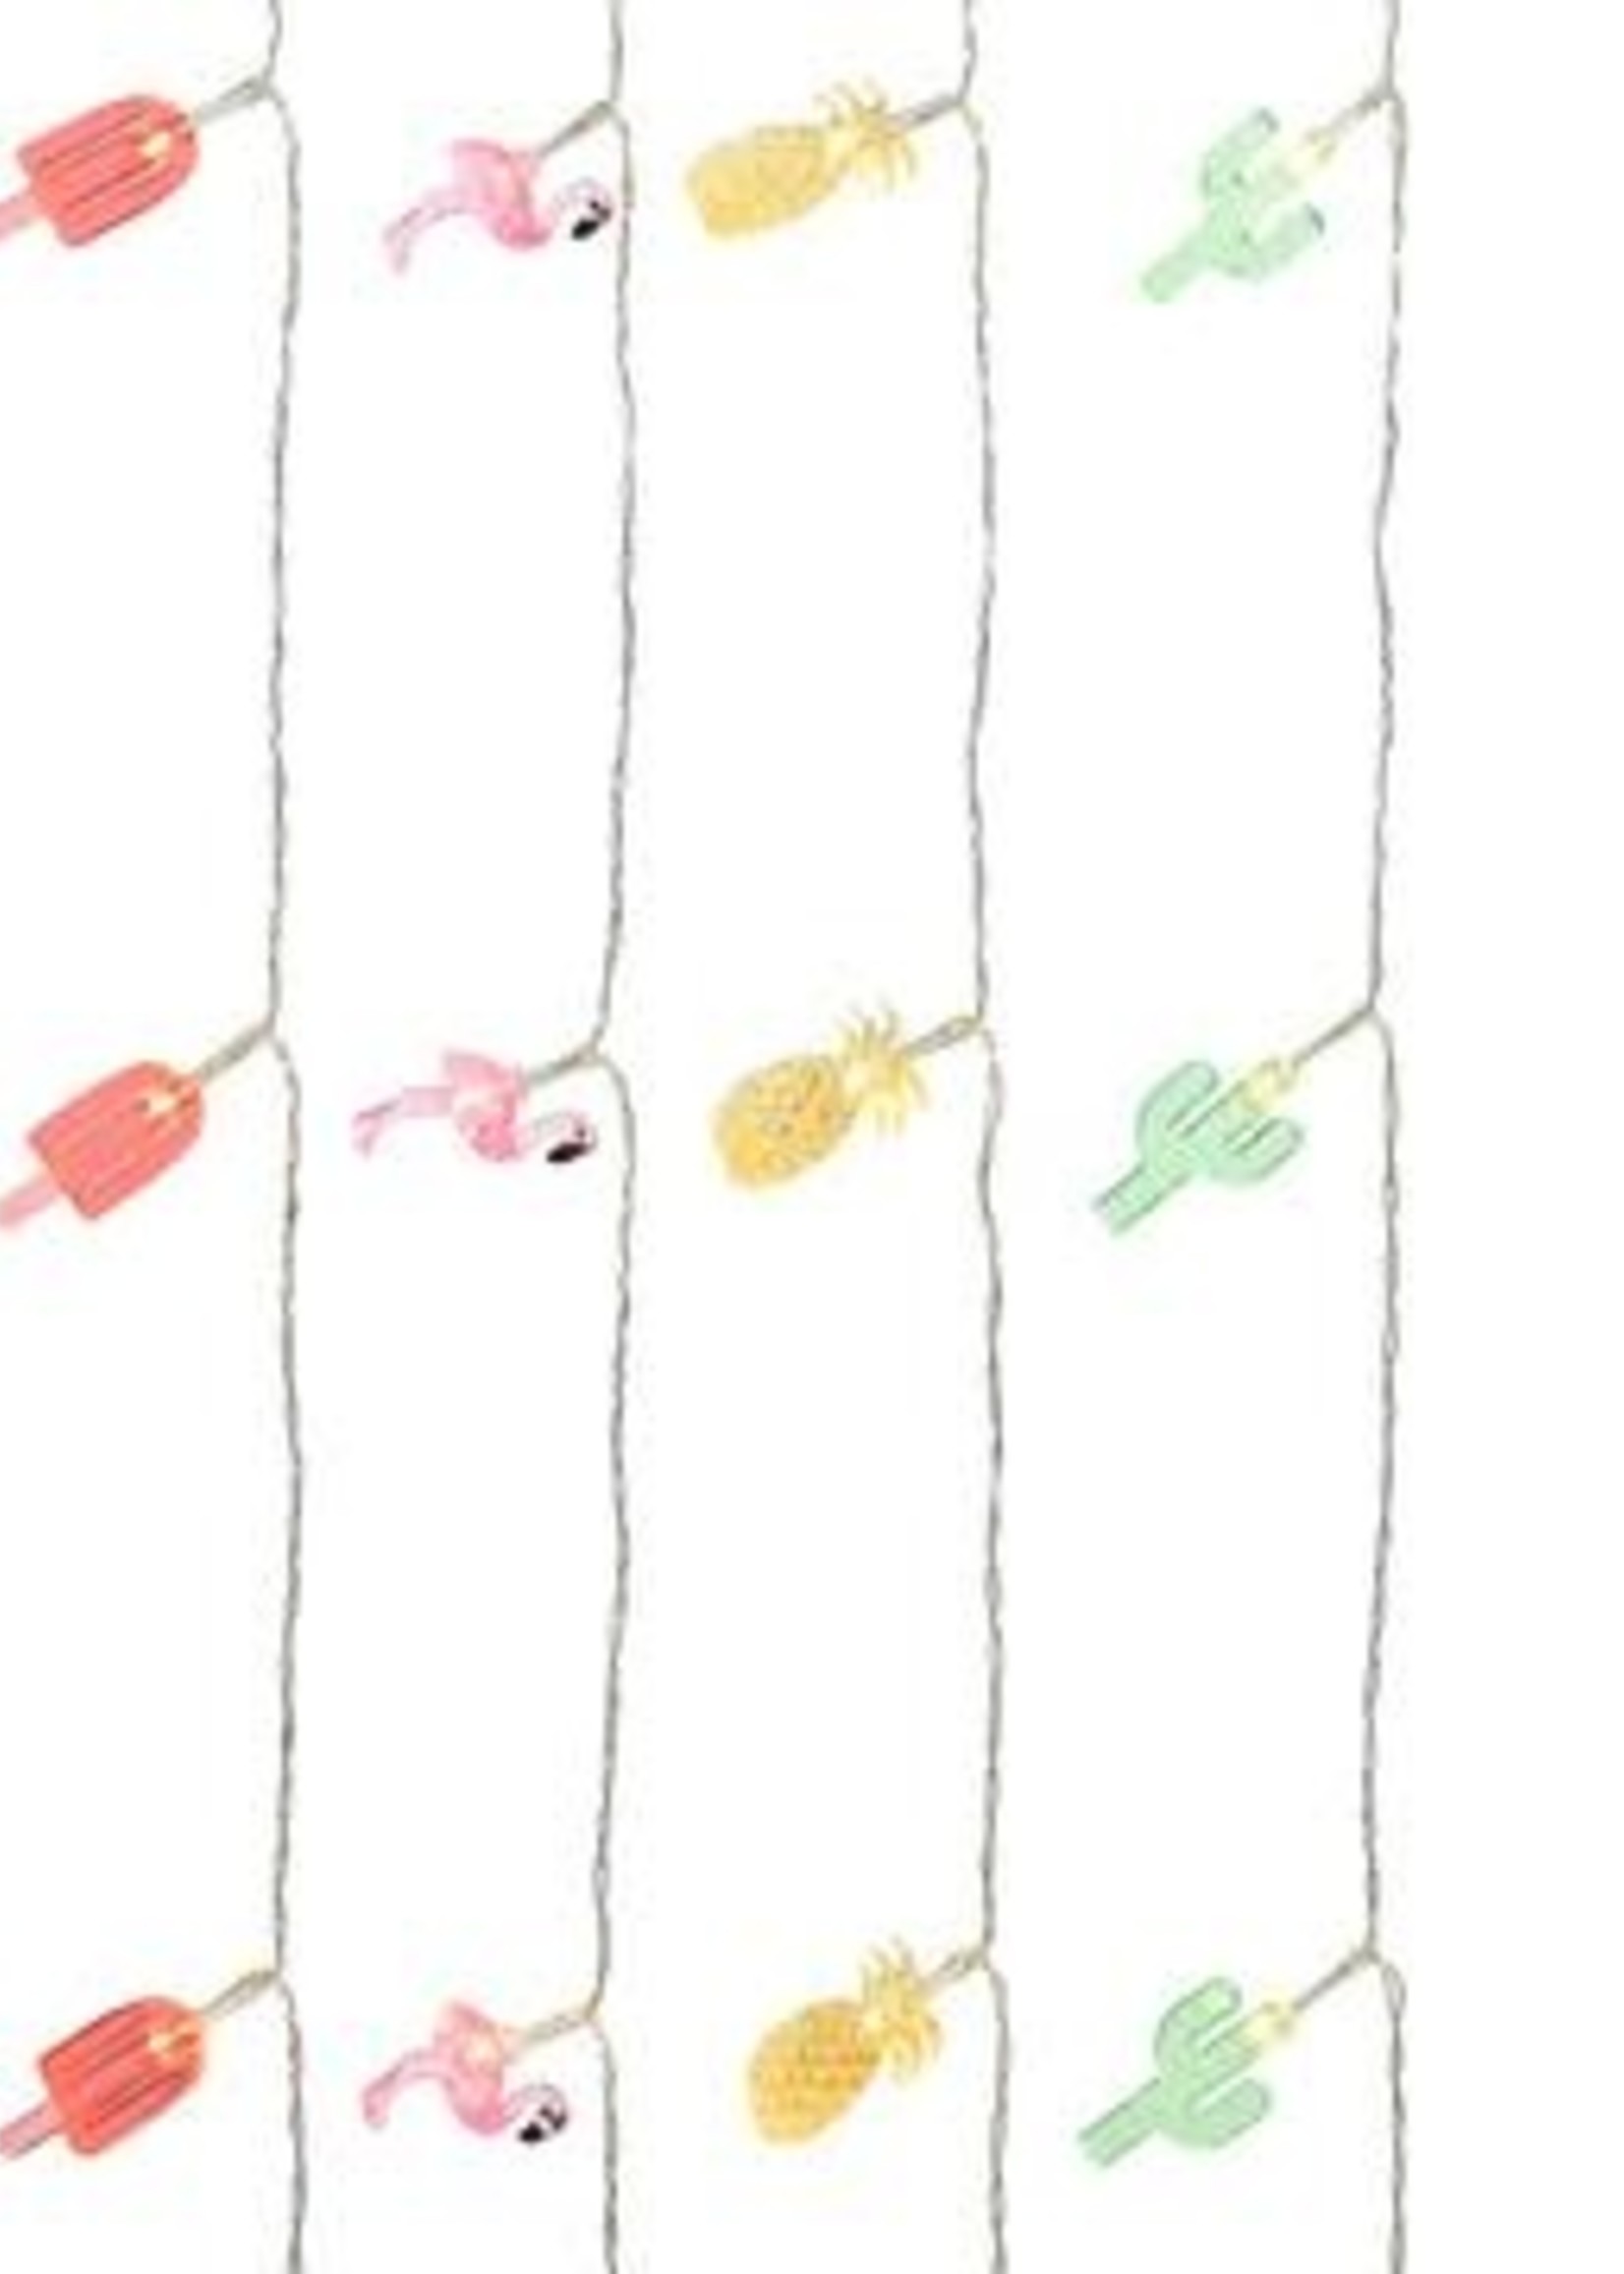 Lumineo Decorative string lights on a wire with summer themes, flamingo, pineapple, cactus or lolly